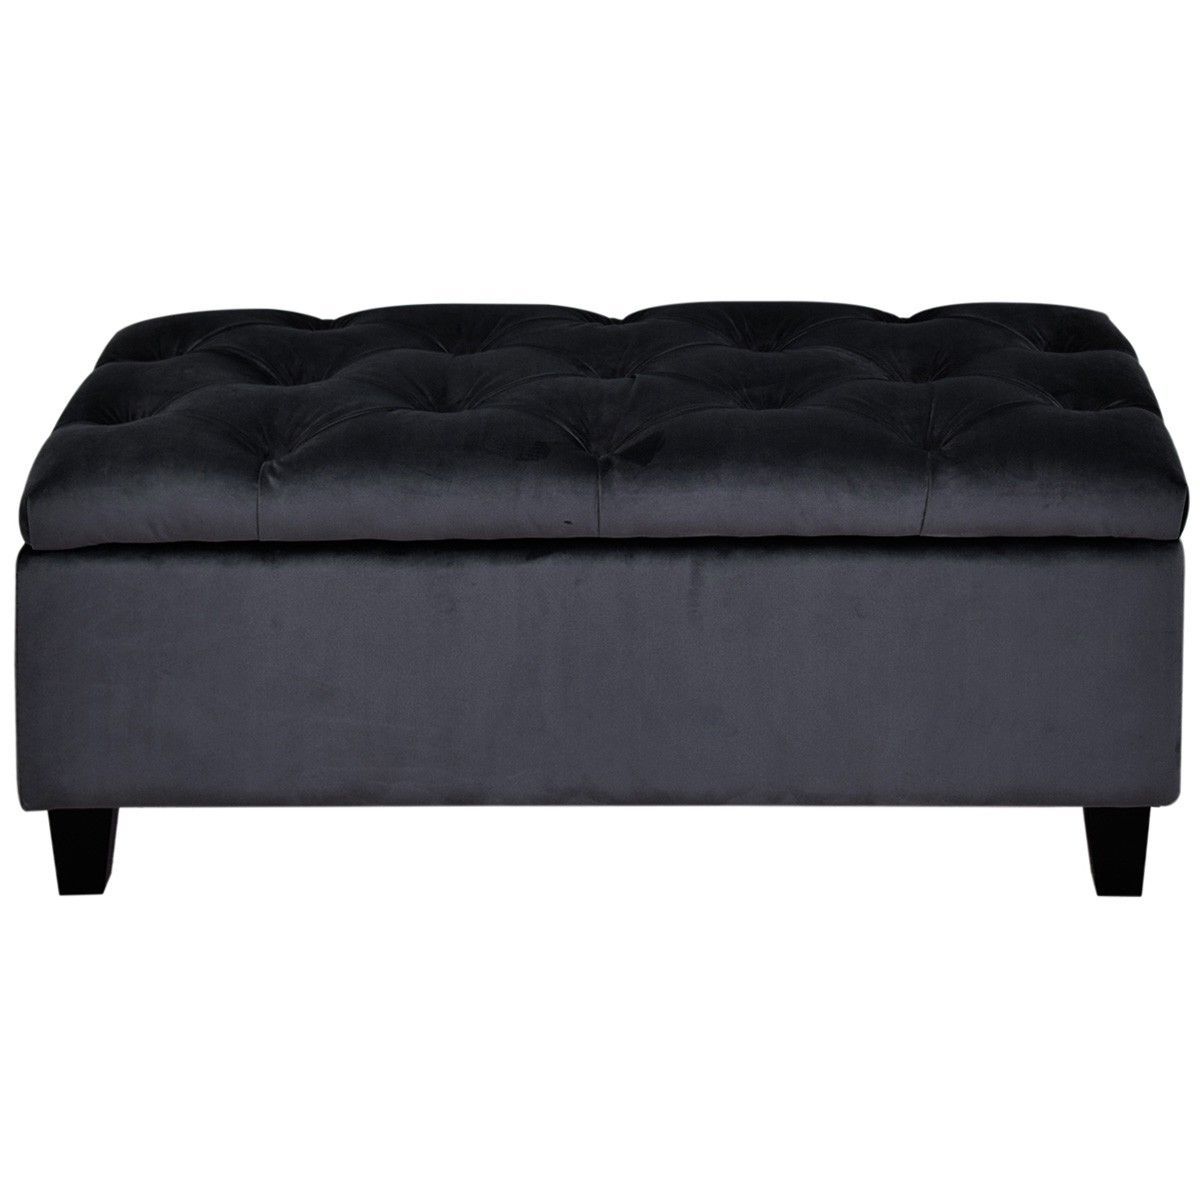 Pippa Tufted Velvet Fabric Storage Ottoman, Charcoal (View 9 of 10)